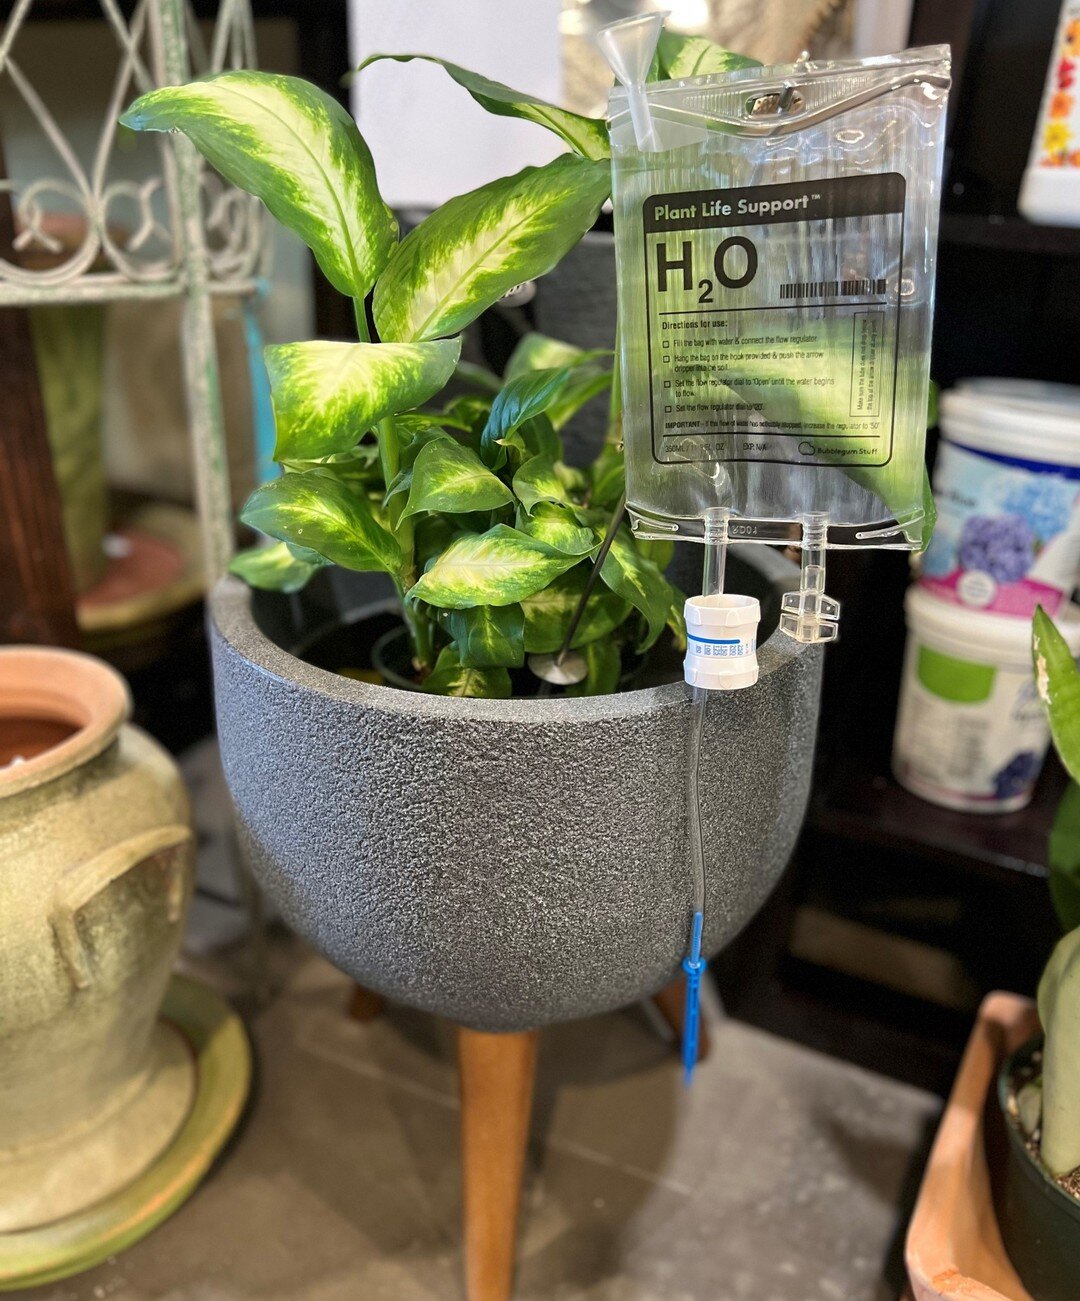 &quot;Don't leave your plants in the murderous hands of a friend or relative whilst you're away on that dream trip.&quot; This is a perfect gift for your black thumb friend 👍🏿

#plantlifesupport #alifelineforyourplant #bluerougegardenandnursery 

2